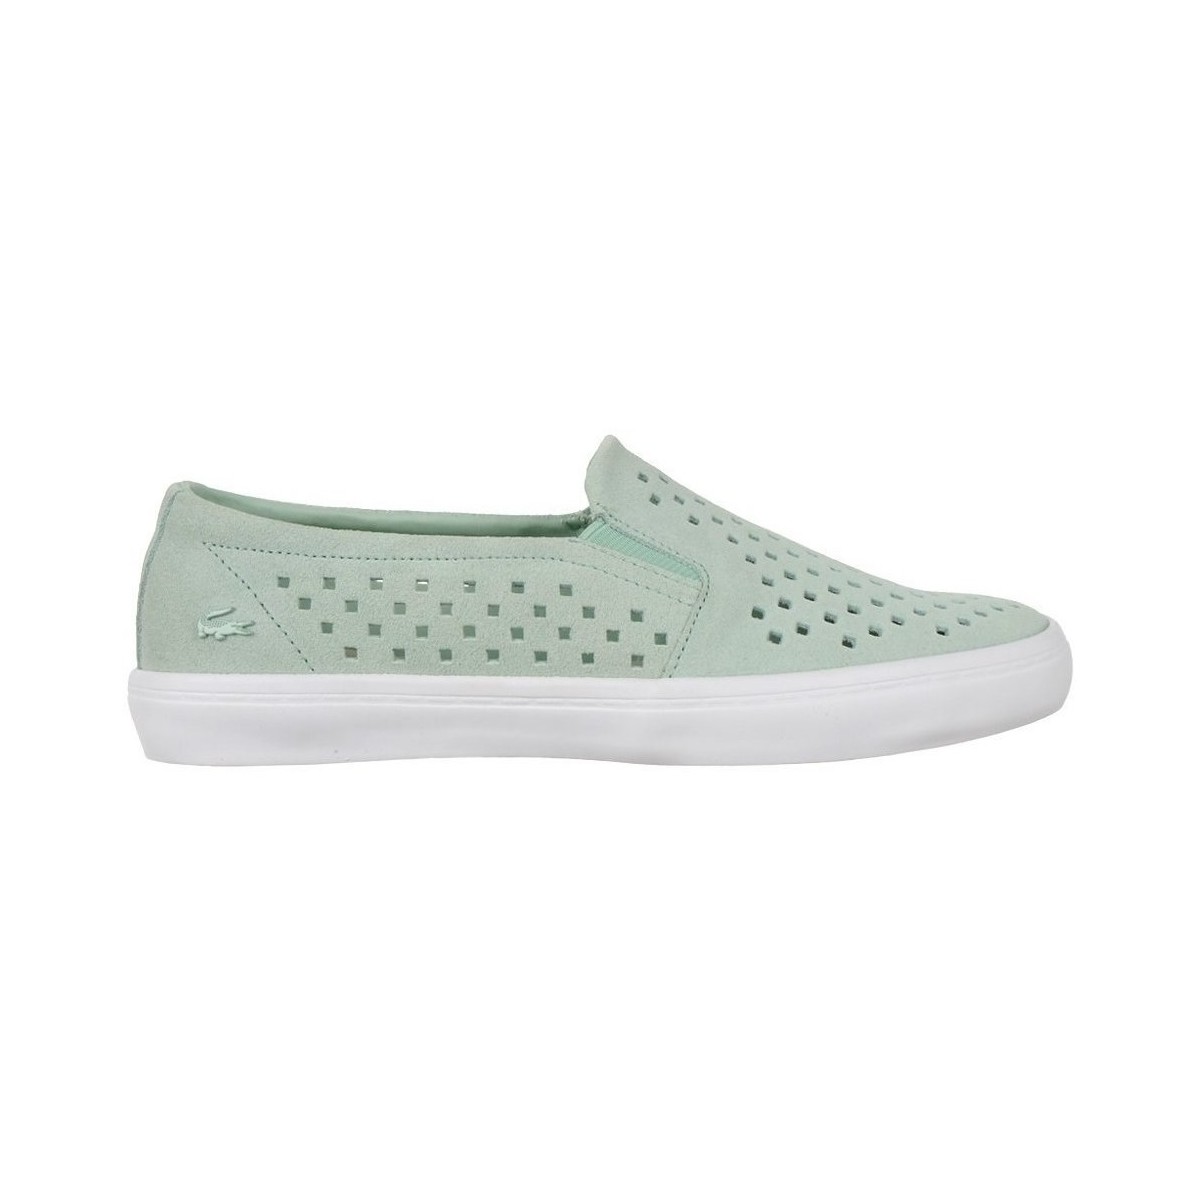 Shoes Women Low top trainers Lacoste Gazon Slip ON 216 1 Caw Green